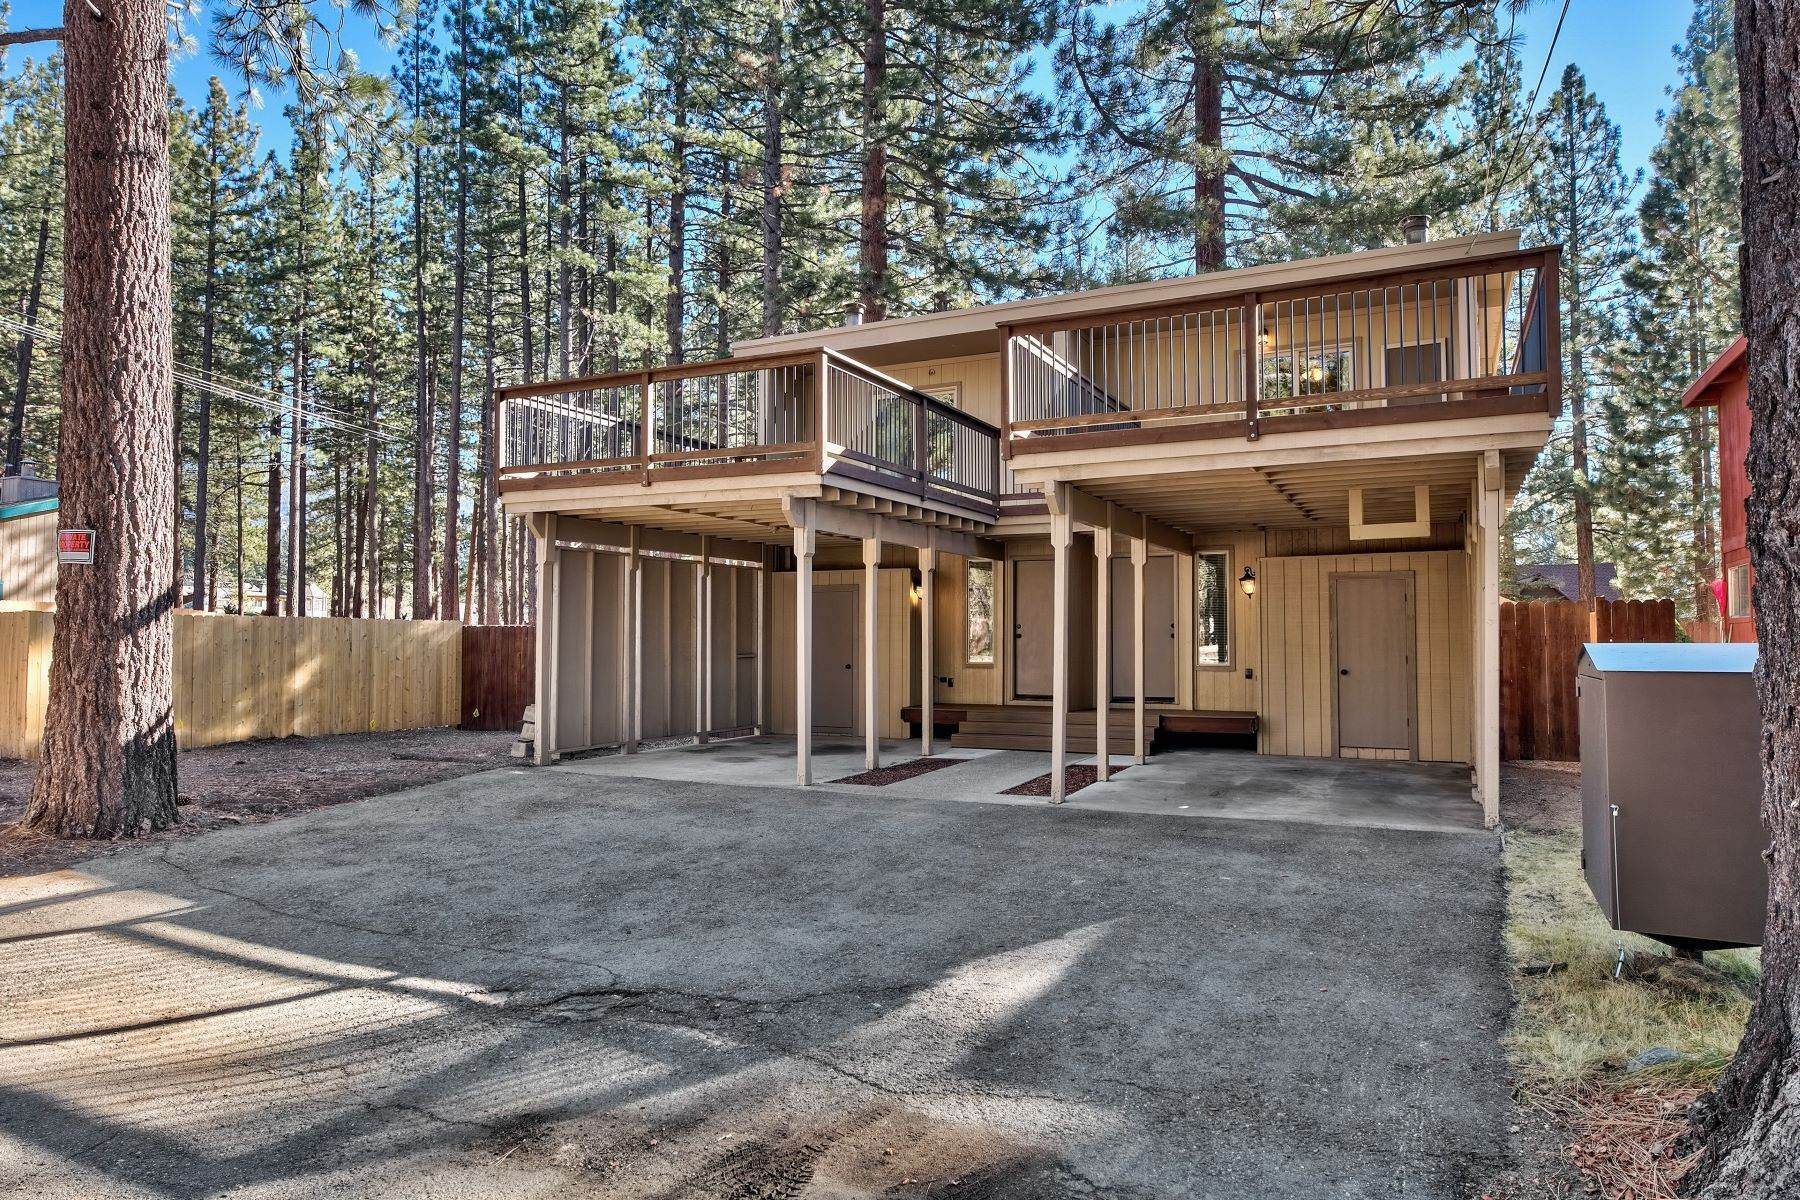 Multi-Family Homes for Active at Beautifully Remodeled Duplex 2424 Ponderosa St South Lake Tahoe, California 96150 United States